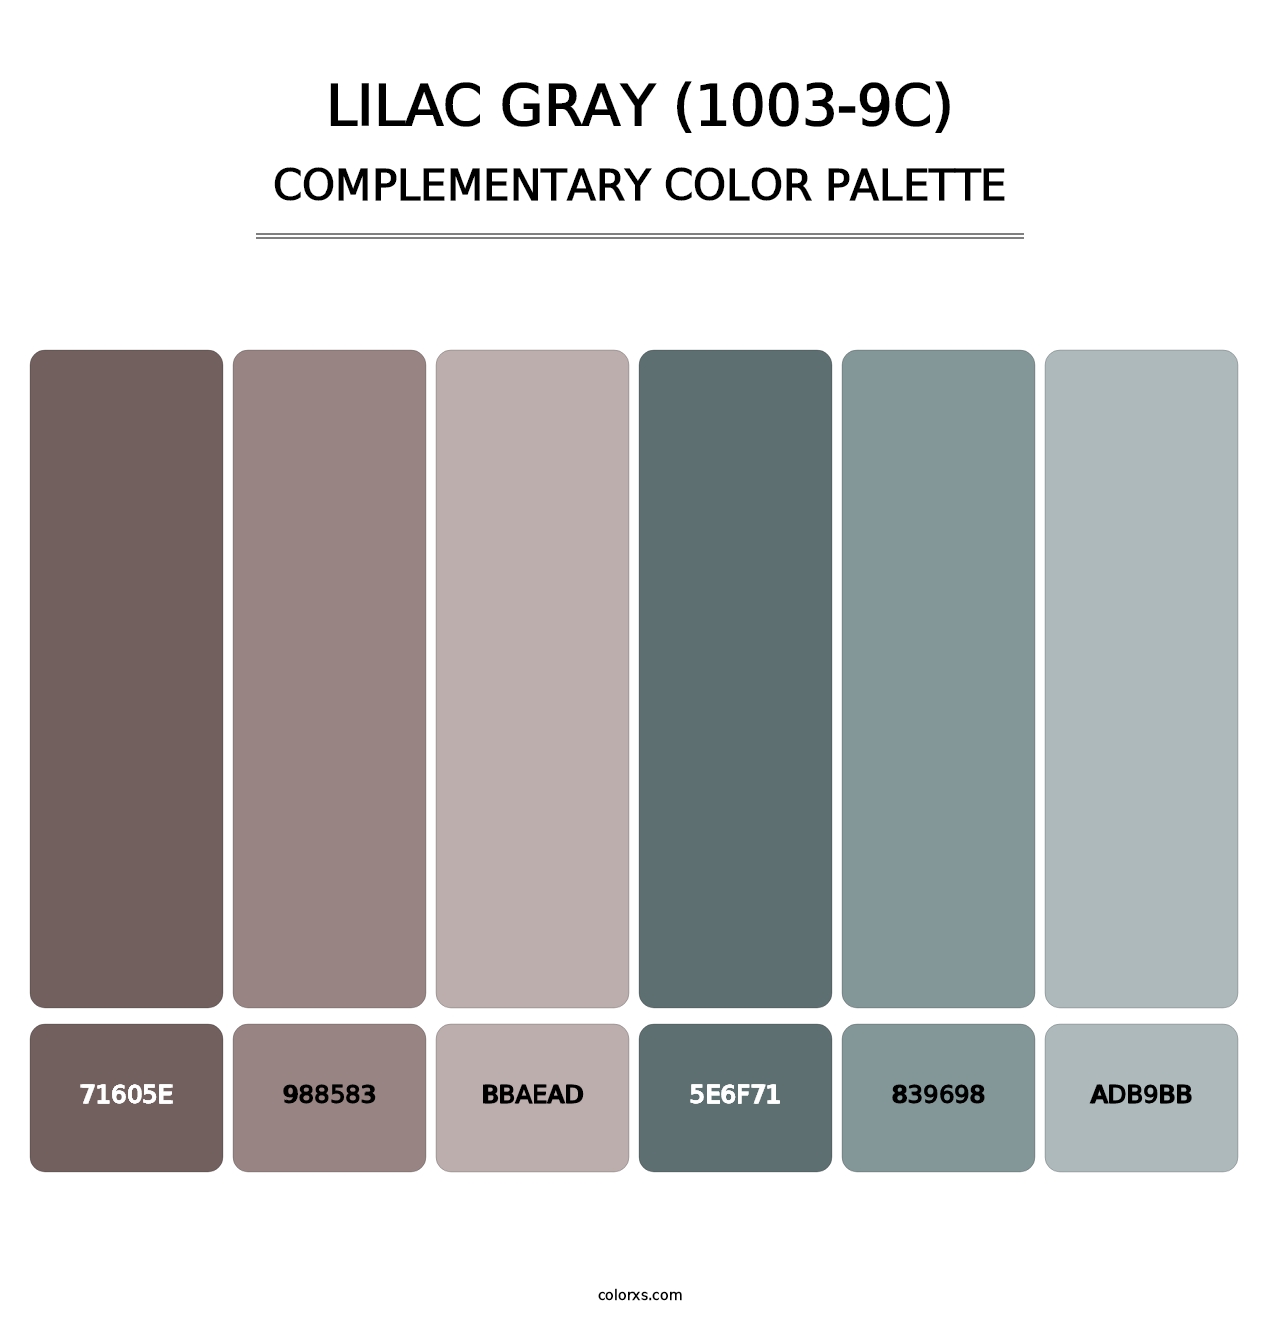 Lilac Gray (1003-9C) - Complementary Color Palette